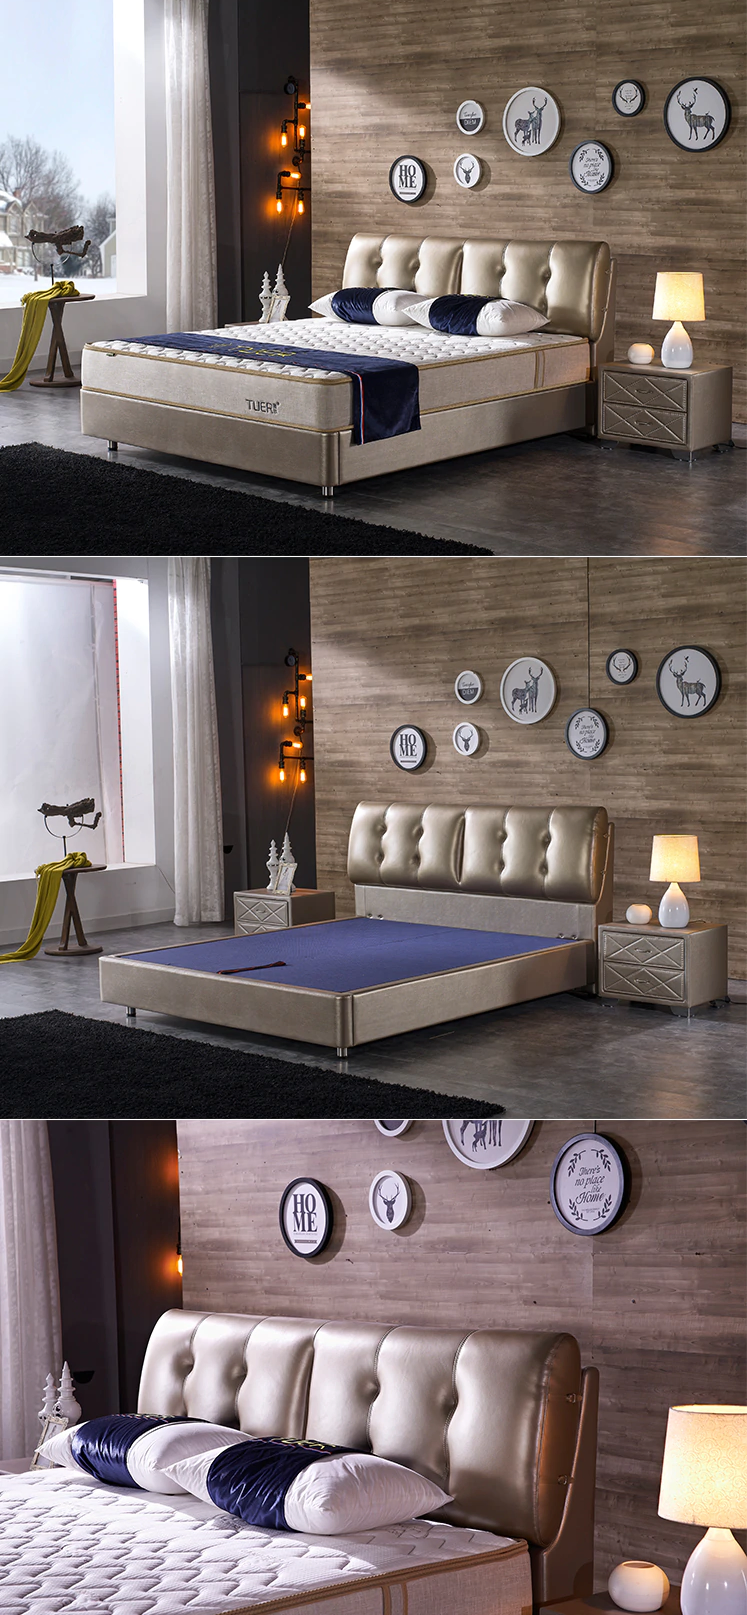 7.SIMPHOME.COM Gold Colored Bedroom with Wood Accents